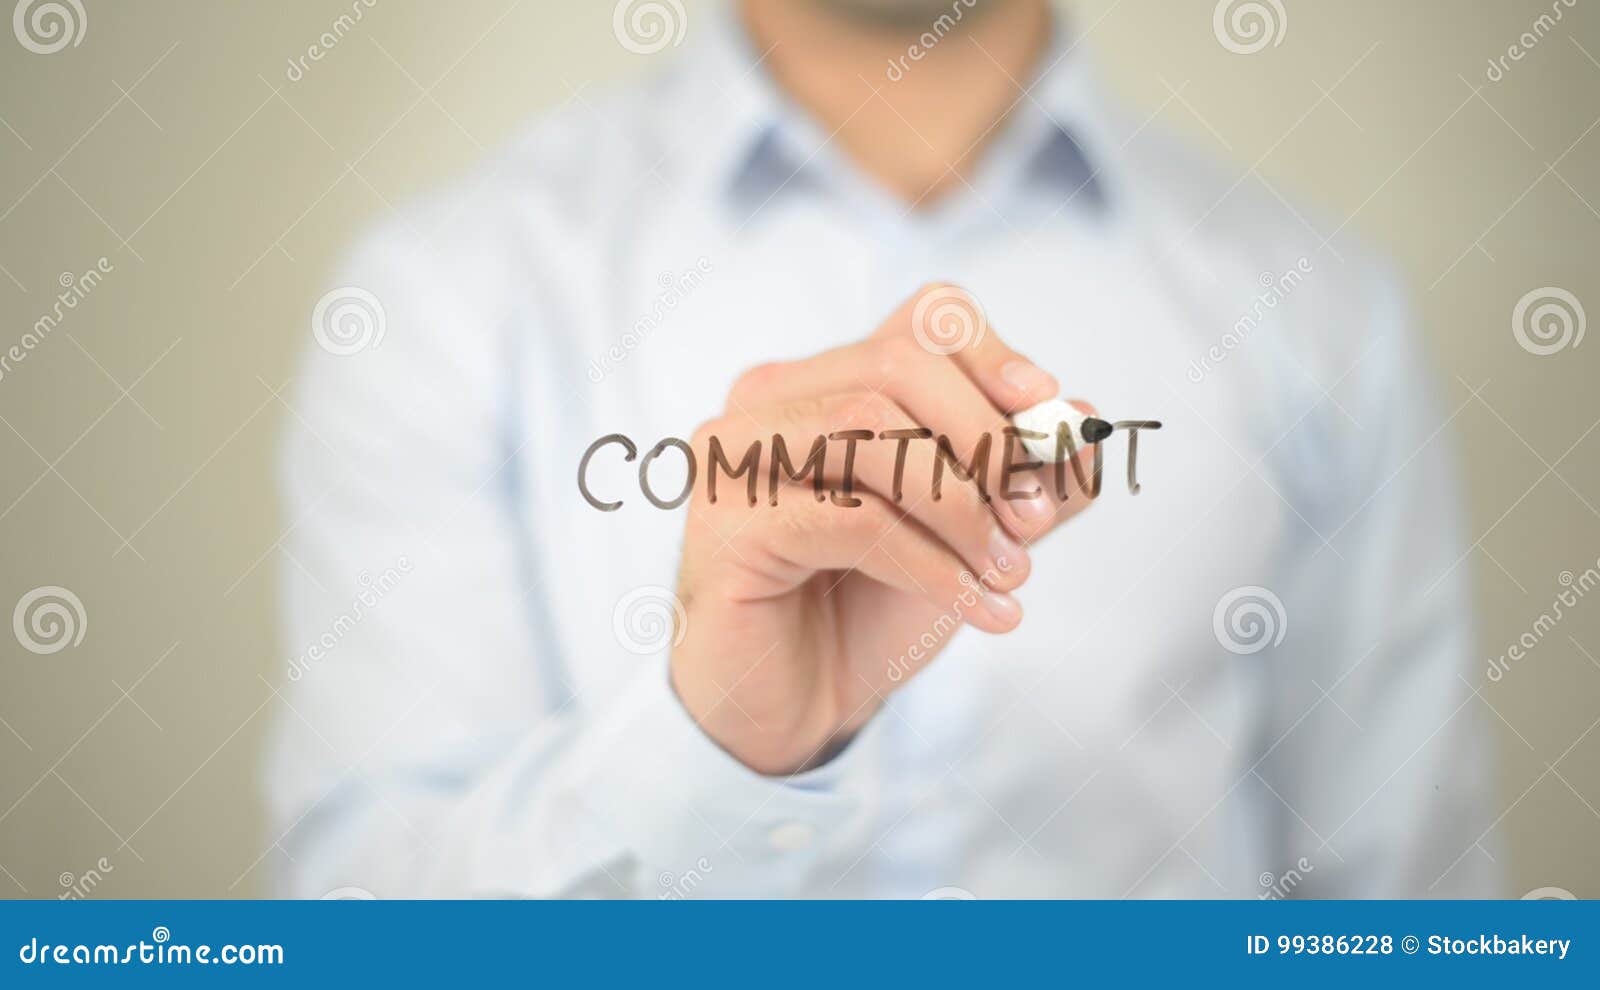 commitment, man writing on transparent screen